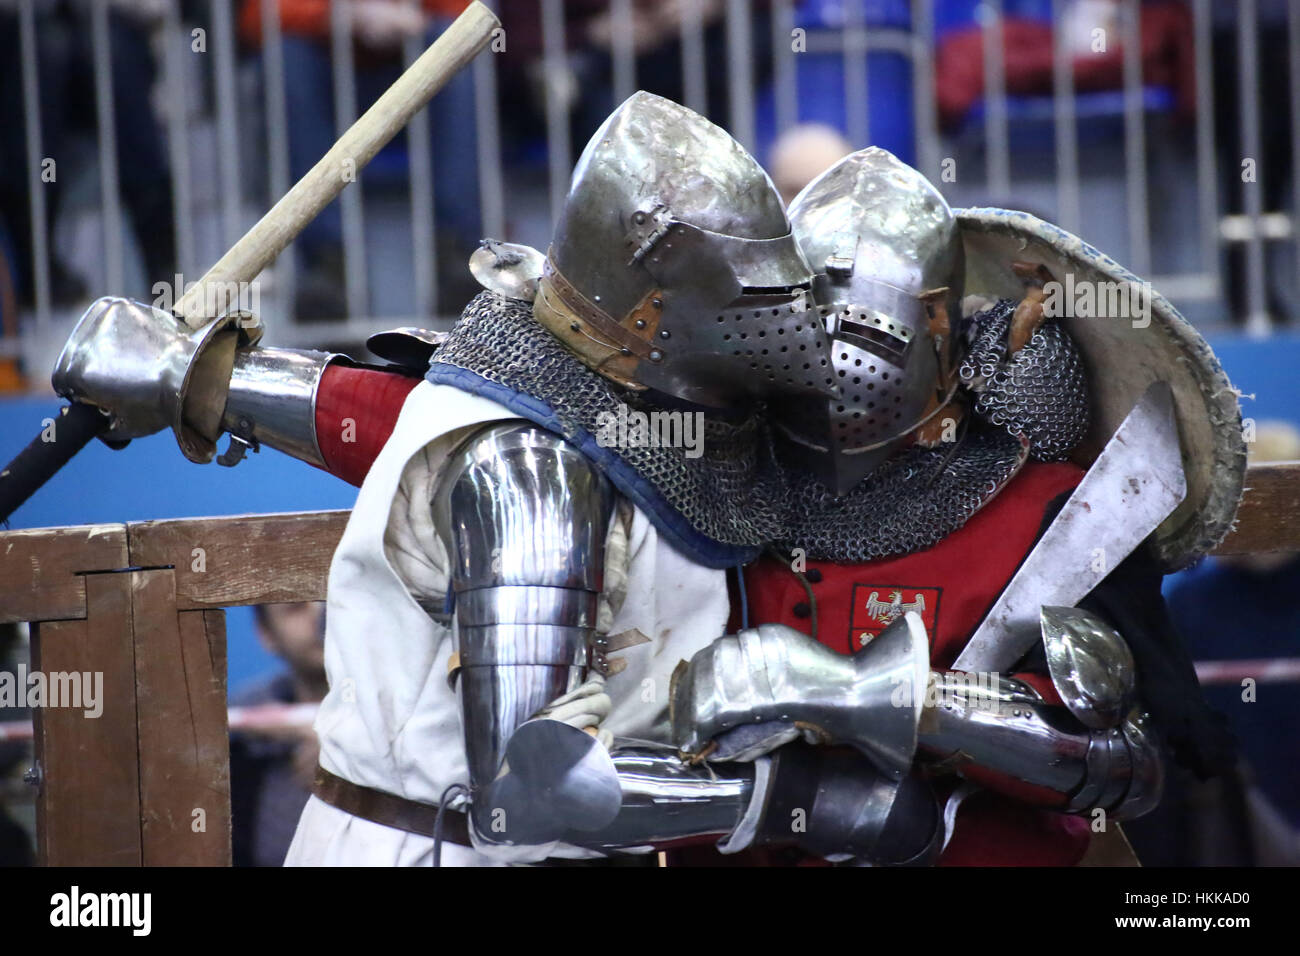 Poland, Warsaw, 28th January 2017: The 3rd Tournament of the Polish League of Fighting Knights was held in Warsaw-Bielany. Several knight groups took part in armoured and medieval weapons fight competiton. Some competitors suffered severe injuries after martial struggles. ©Jake Ratz/Alamy Live News Stock Photo